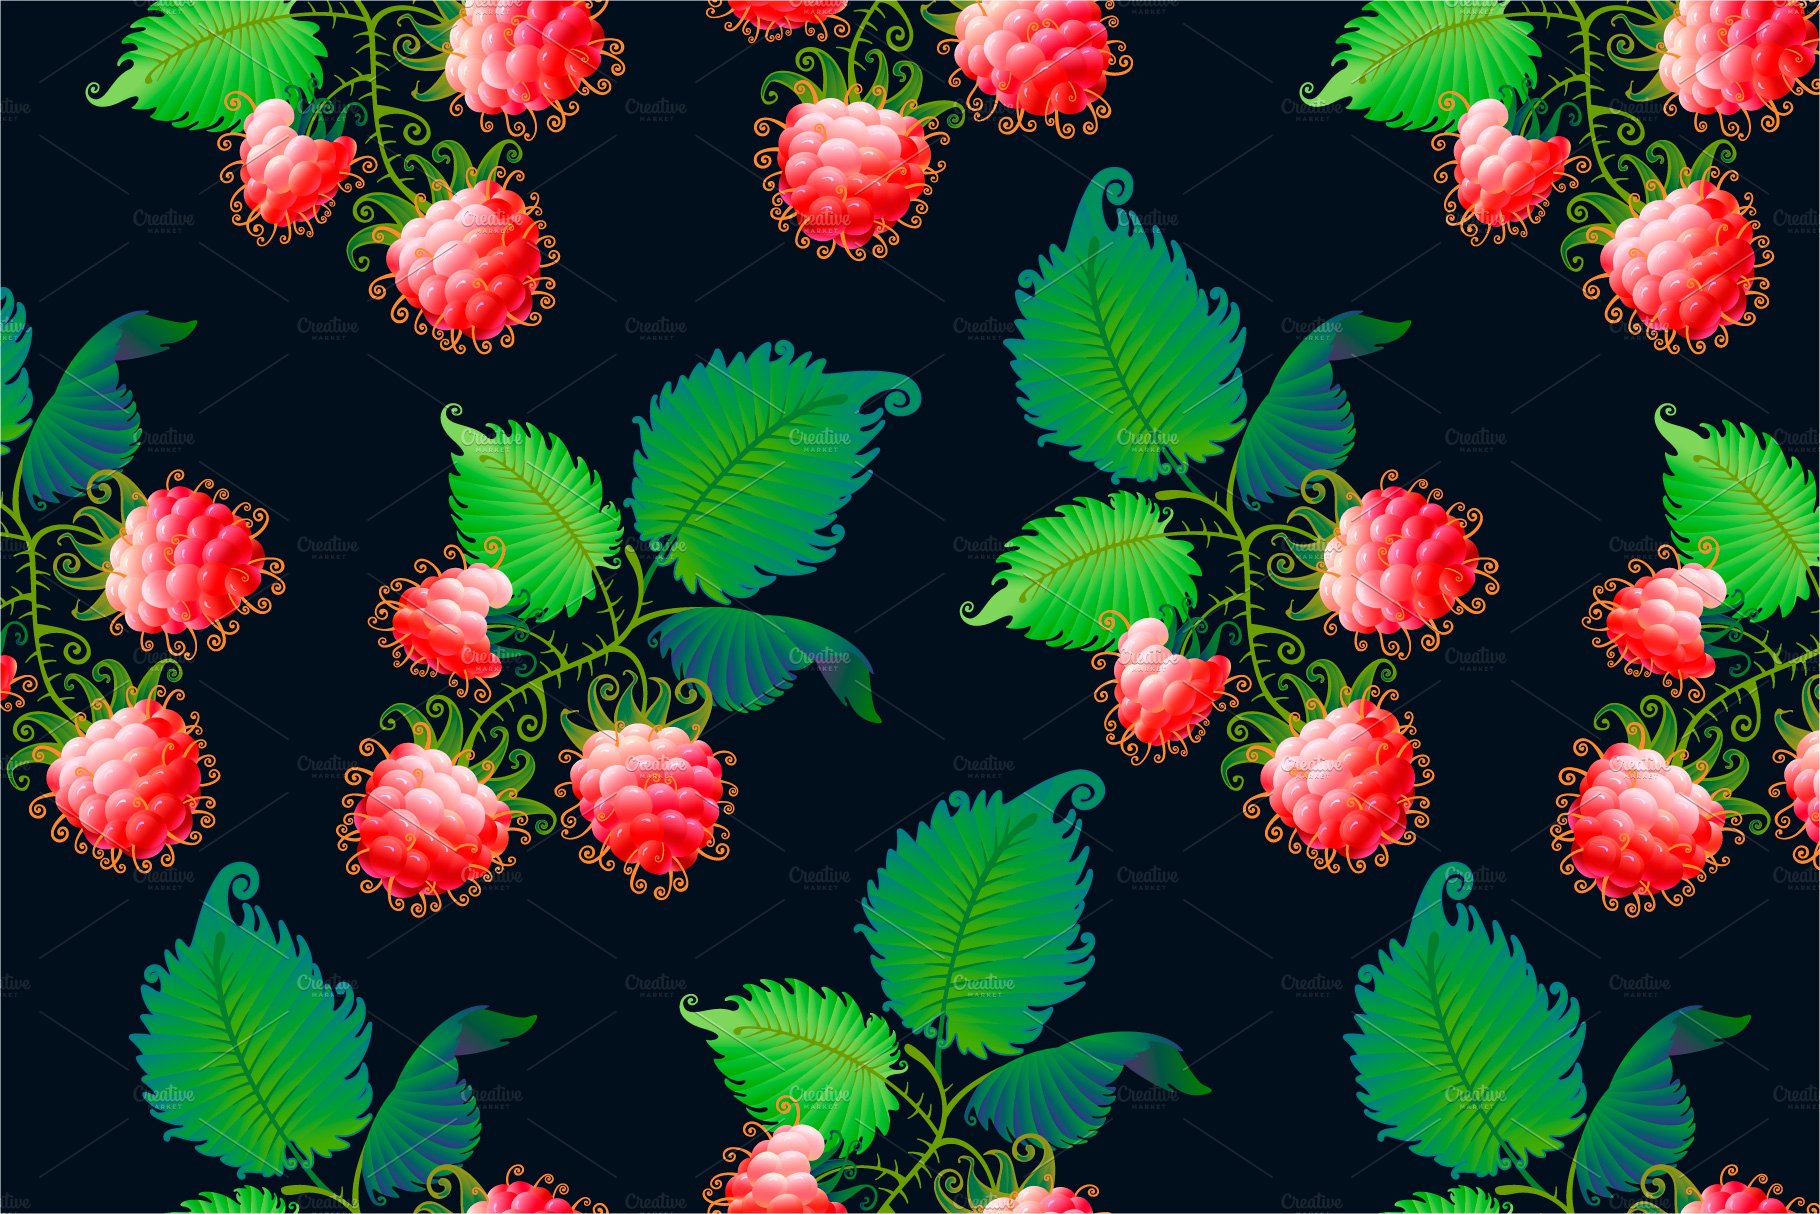 Raspberry. Art and patterns cover image.